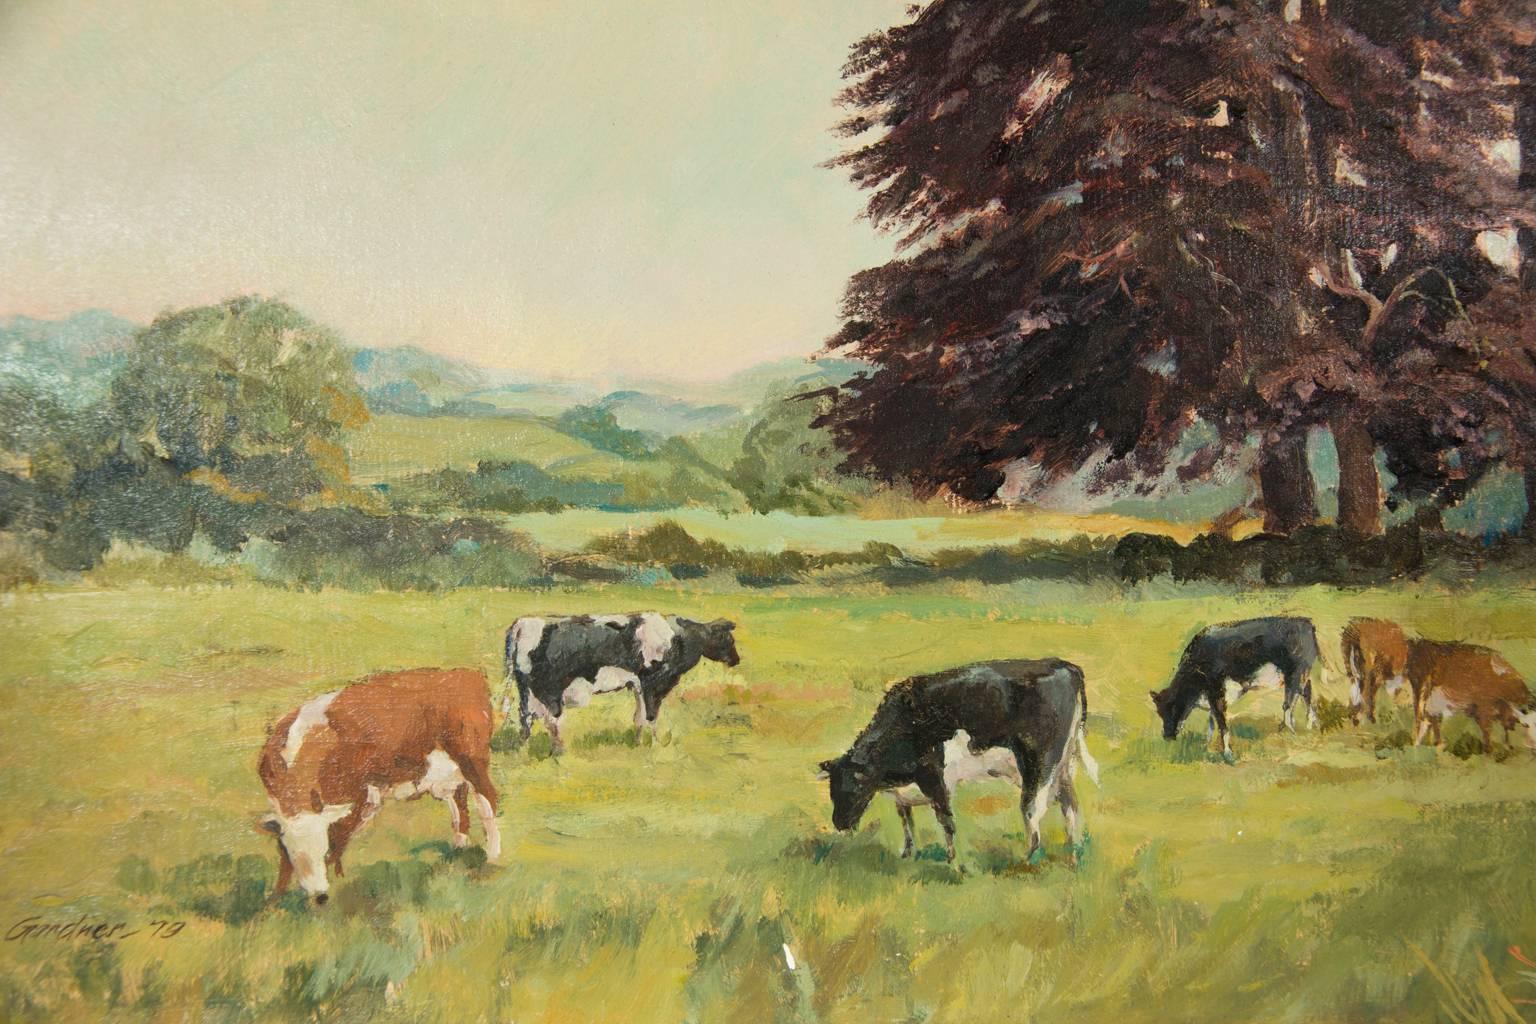 A signed 1979 painting by the artist Reginald Gardner, depicting grazing cows in a landscape. Signed and dated in the lower left. Painted on board.